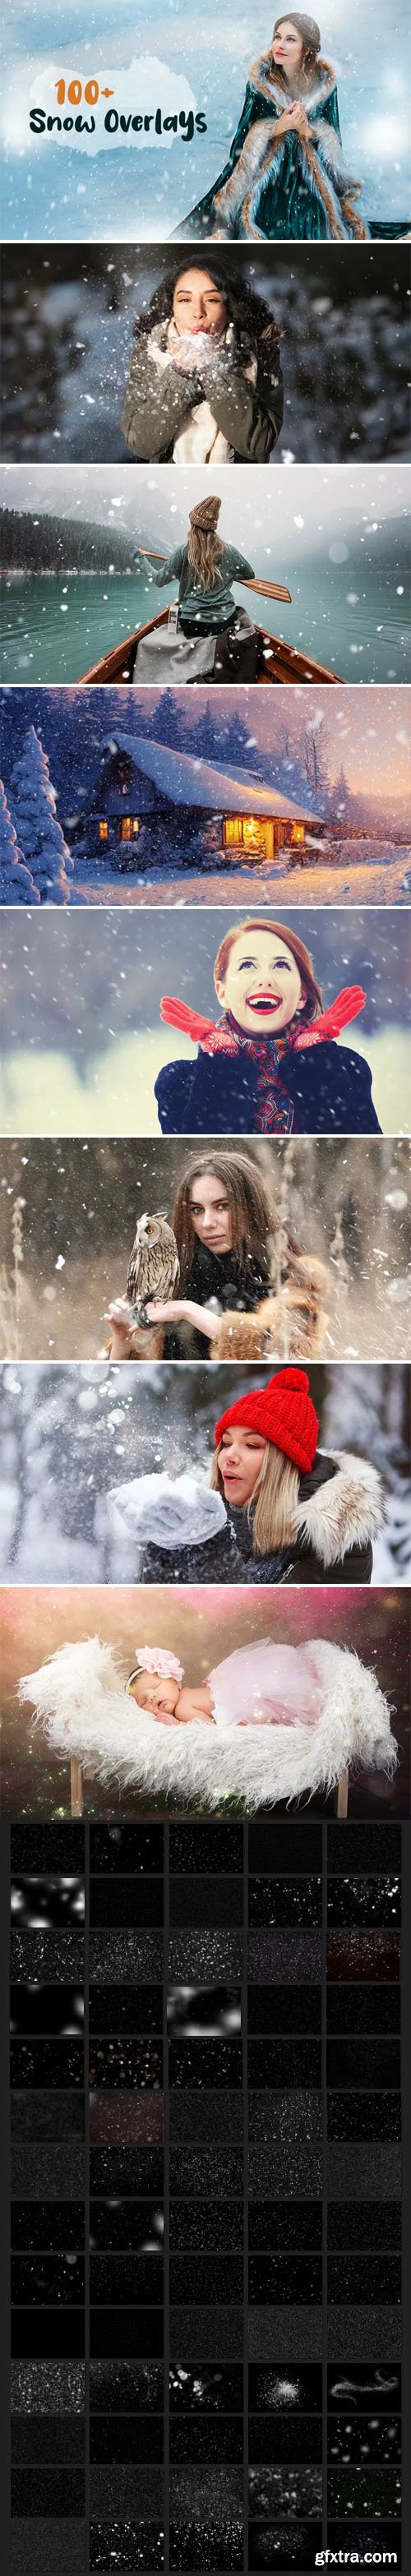 100+ Realistic Falling Snow Overlays for Photoshop